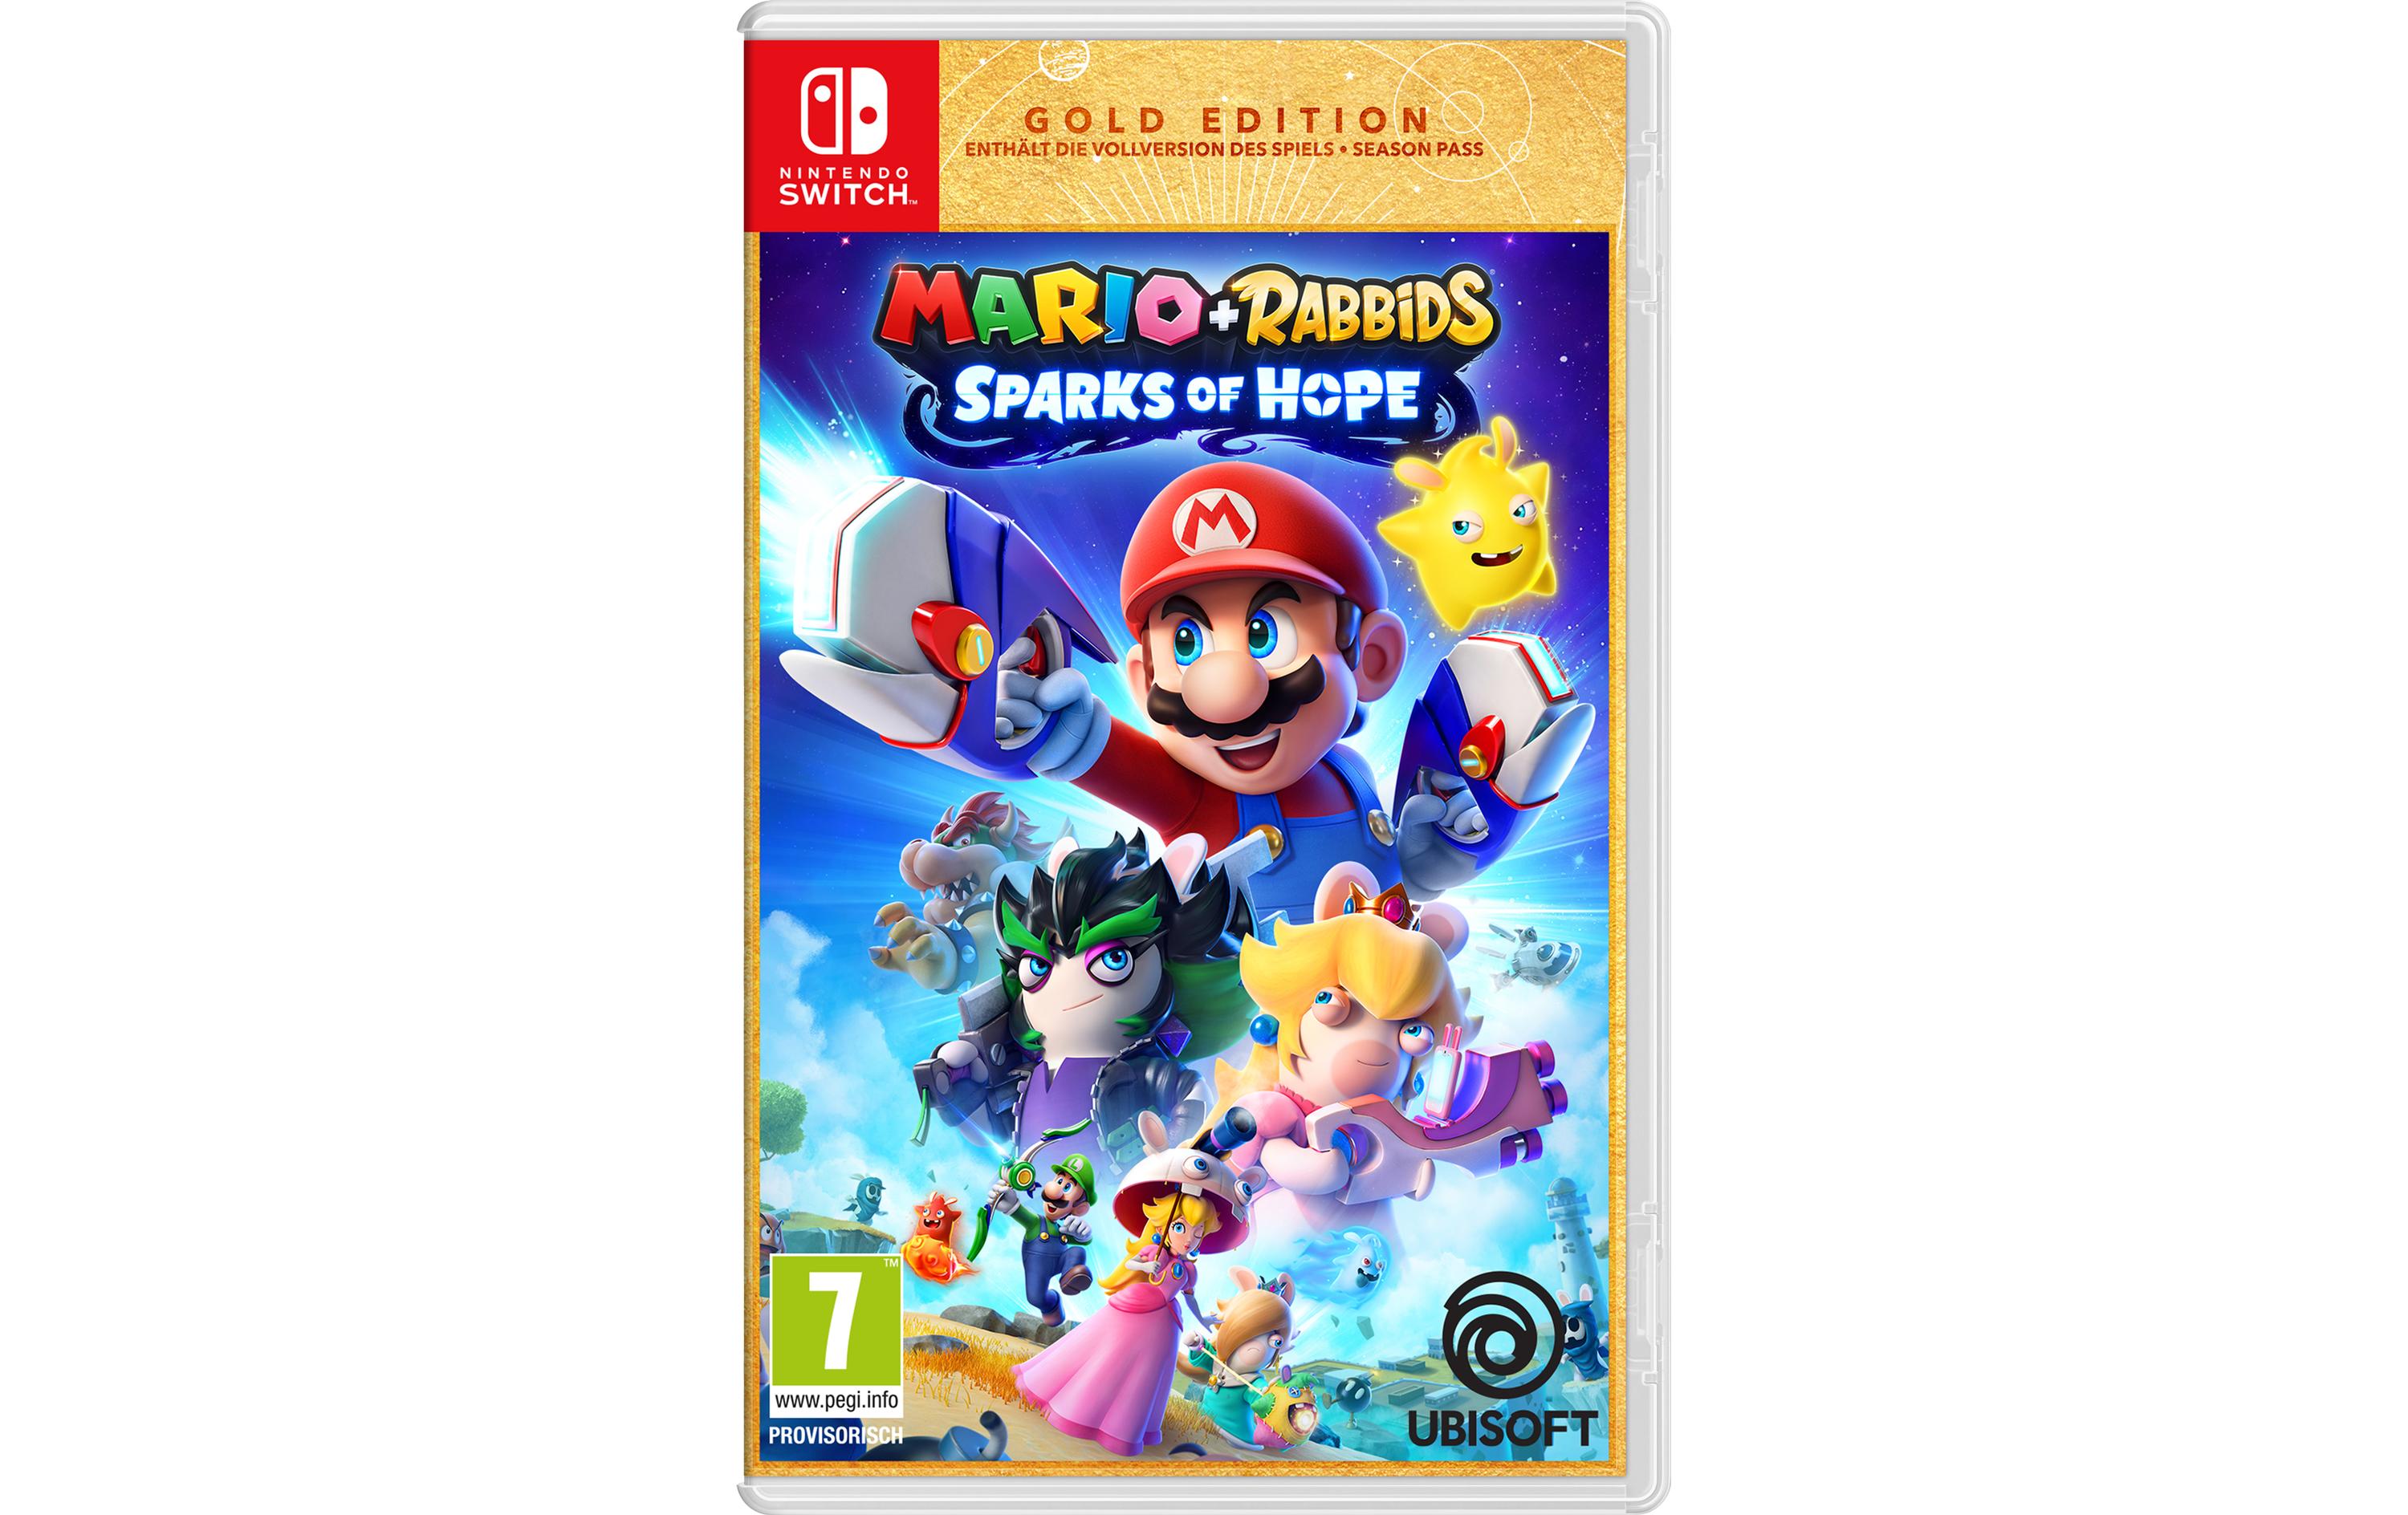 Switch Edition & Games Rabbids Hope Nintendo Gold - Sparks of Mario